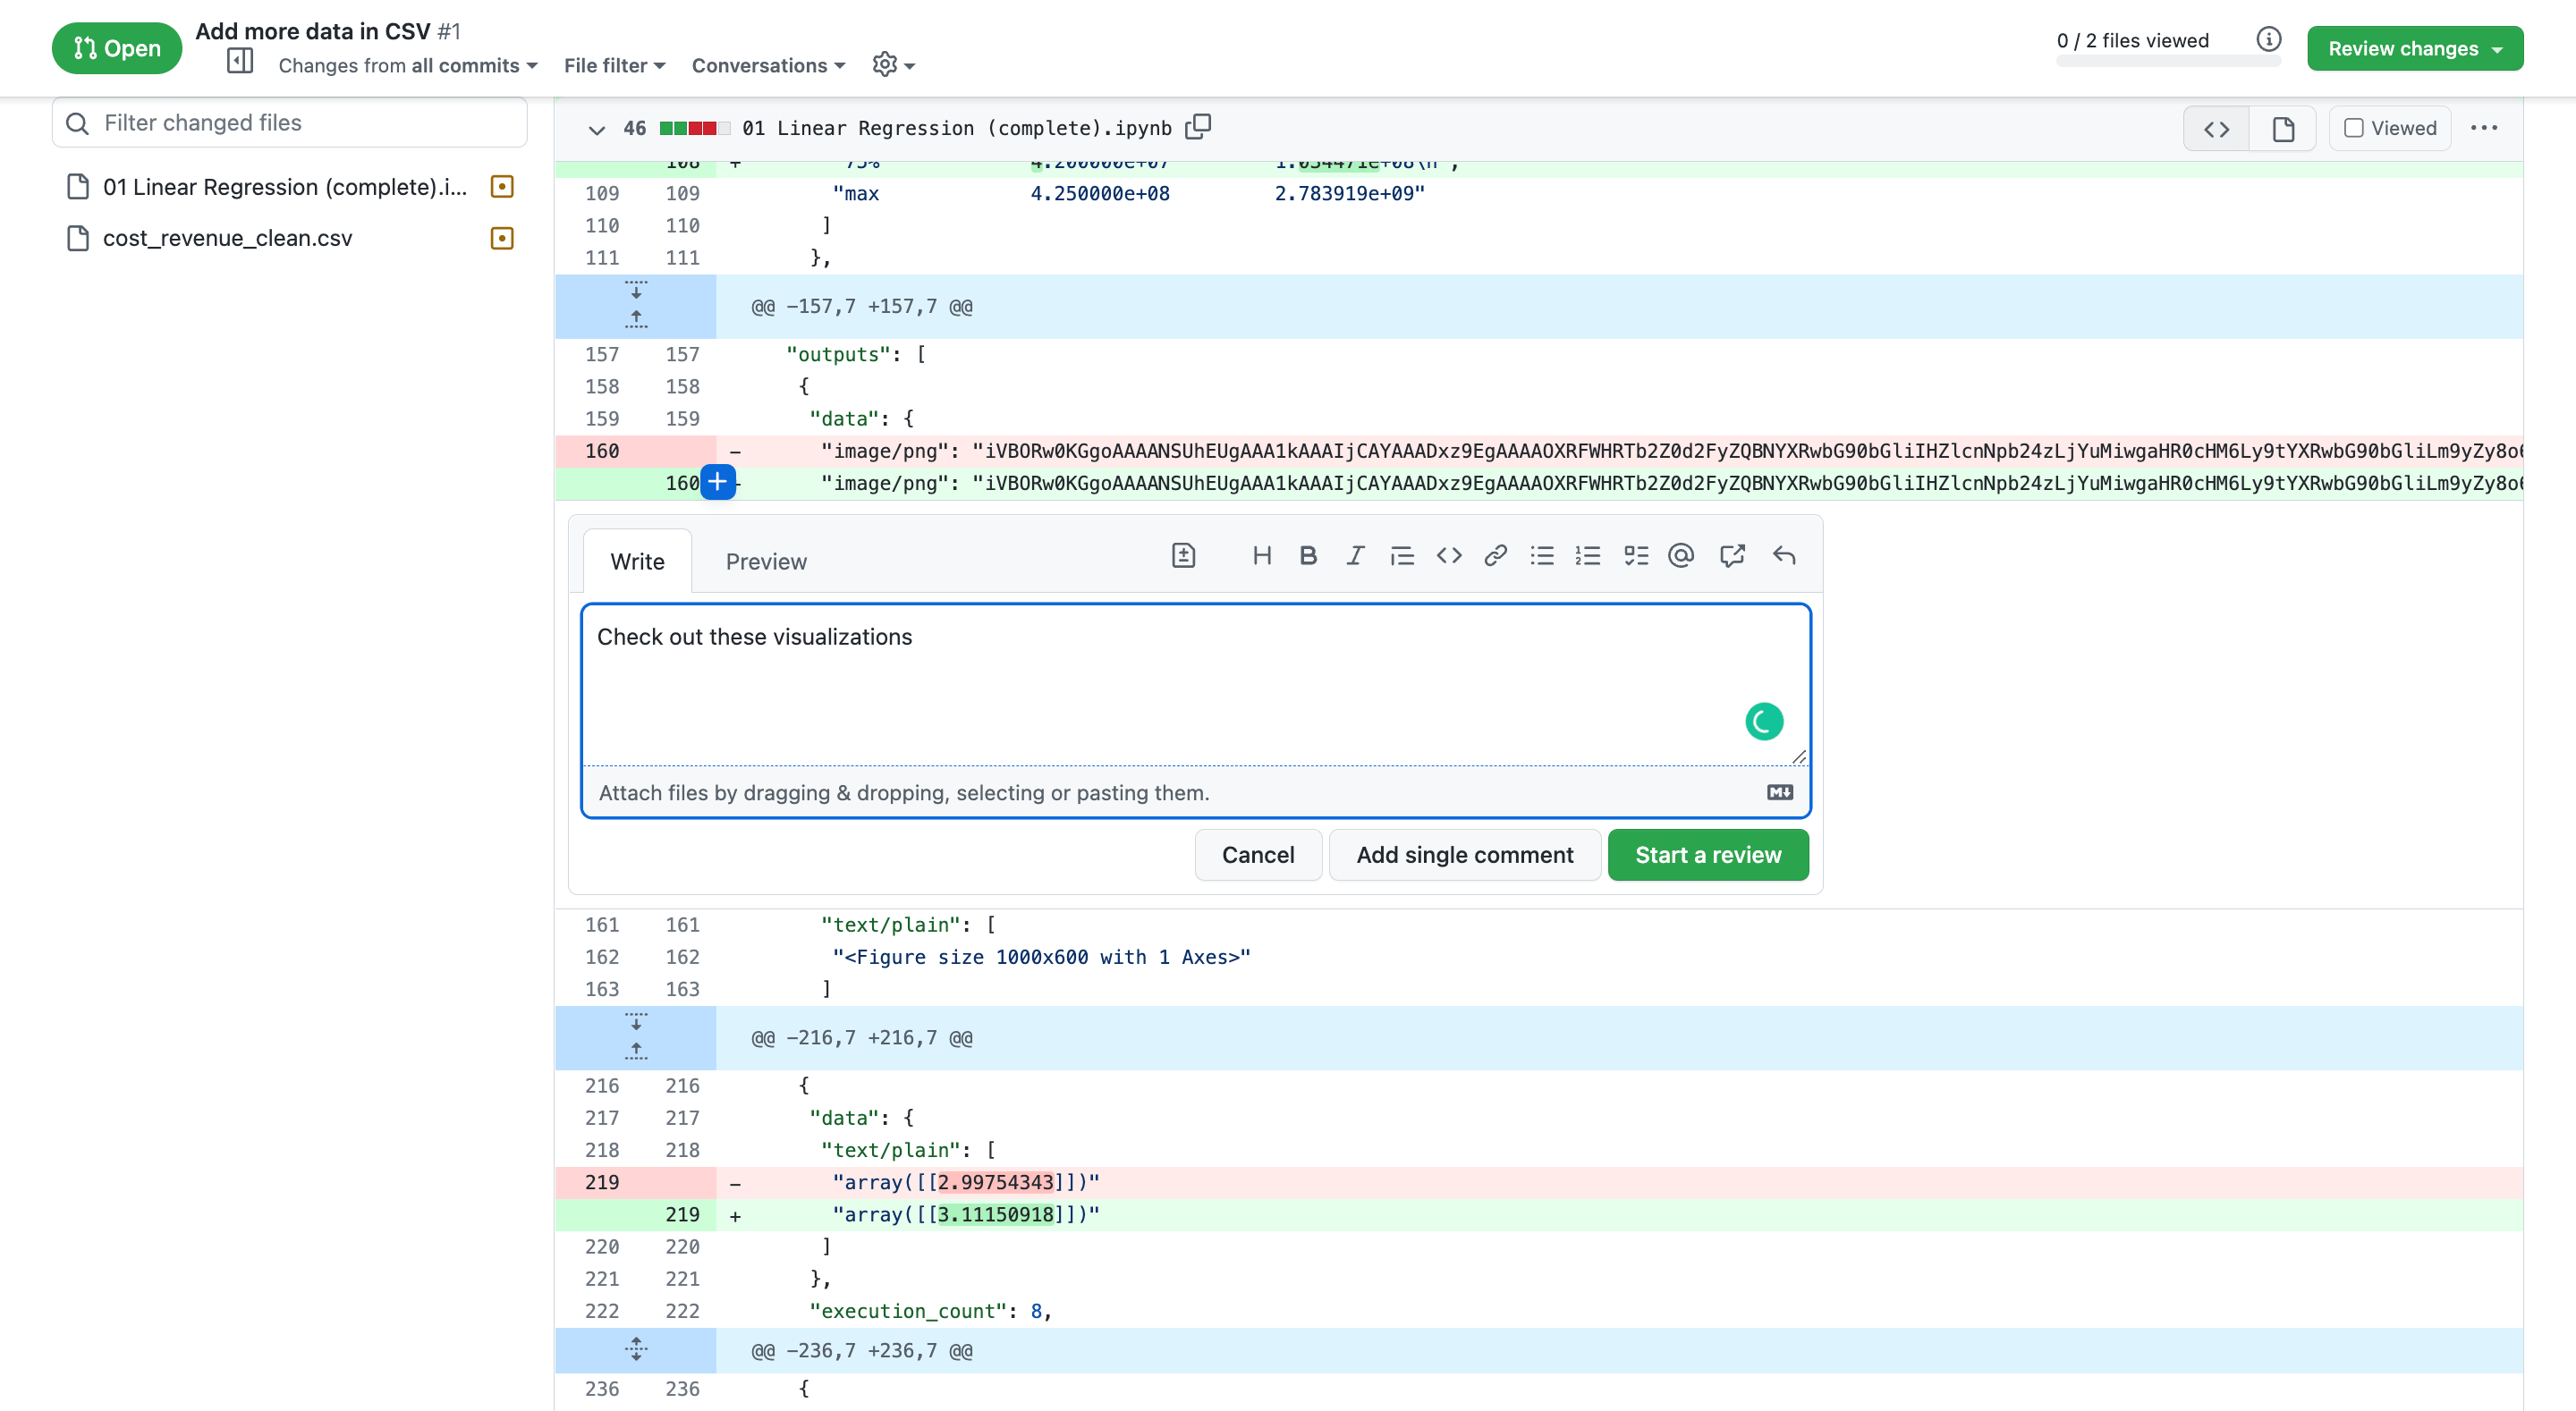 You can only comment on text diff in GitHub